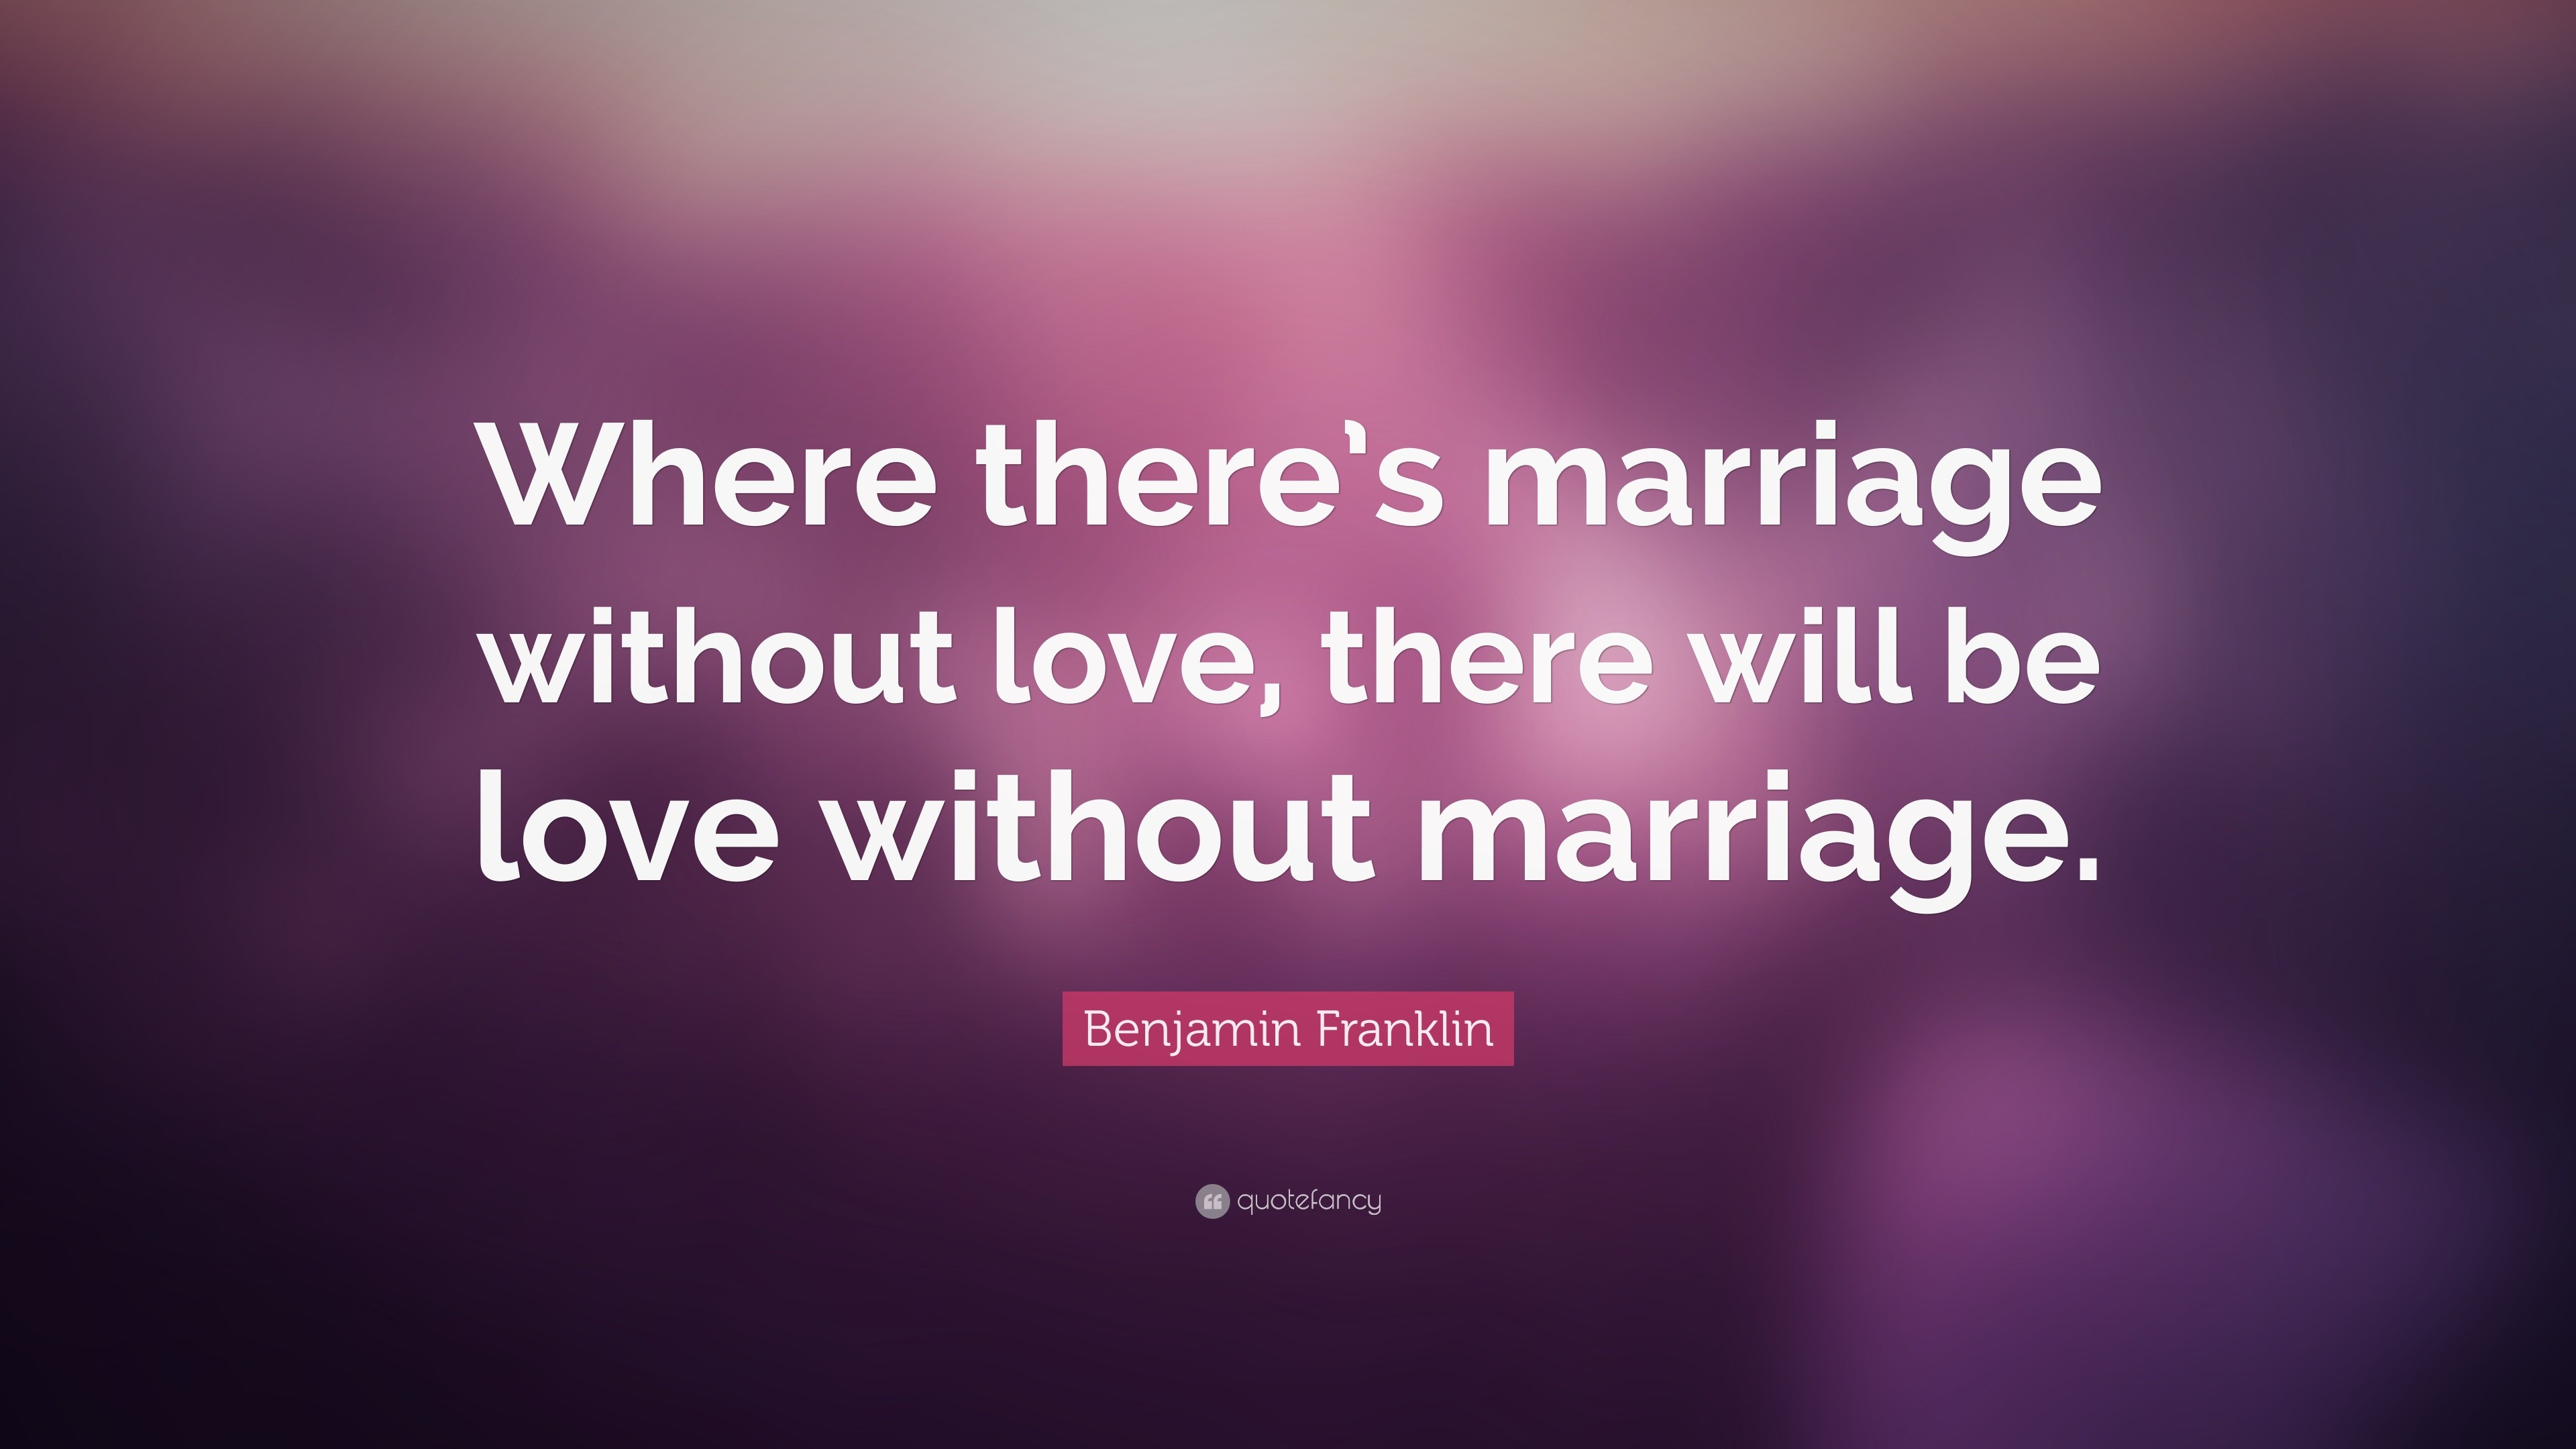 Benjamin Franklin Quote: “Where there’s marriage without love, there ...